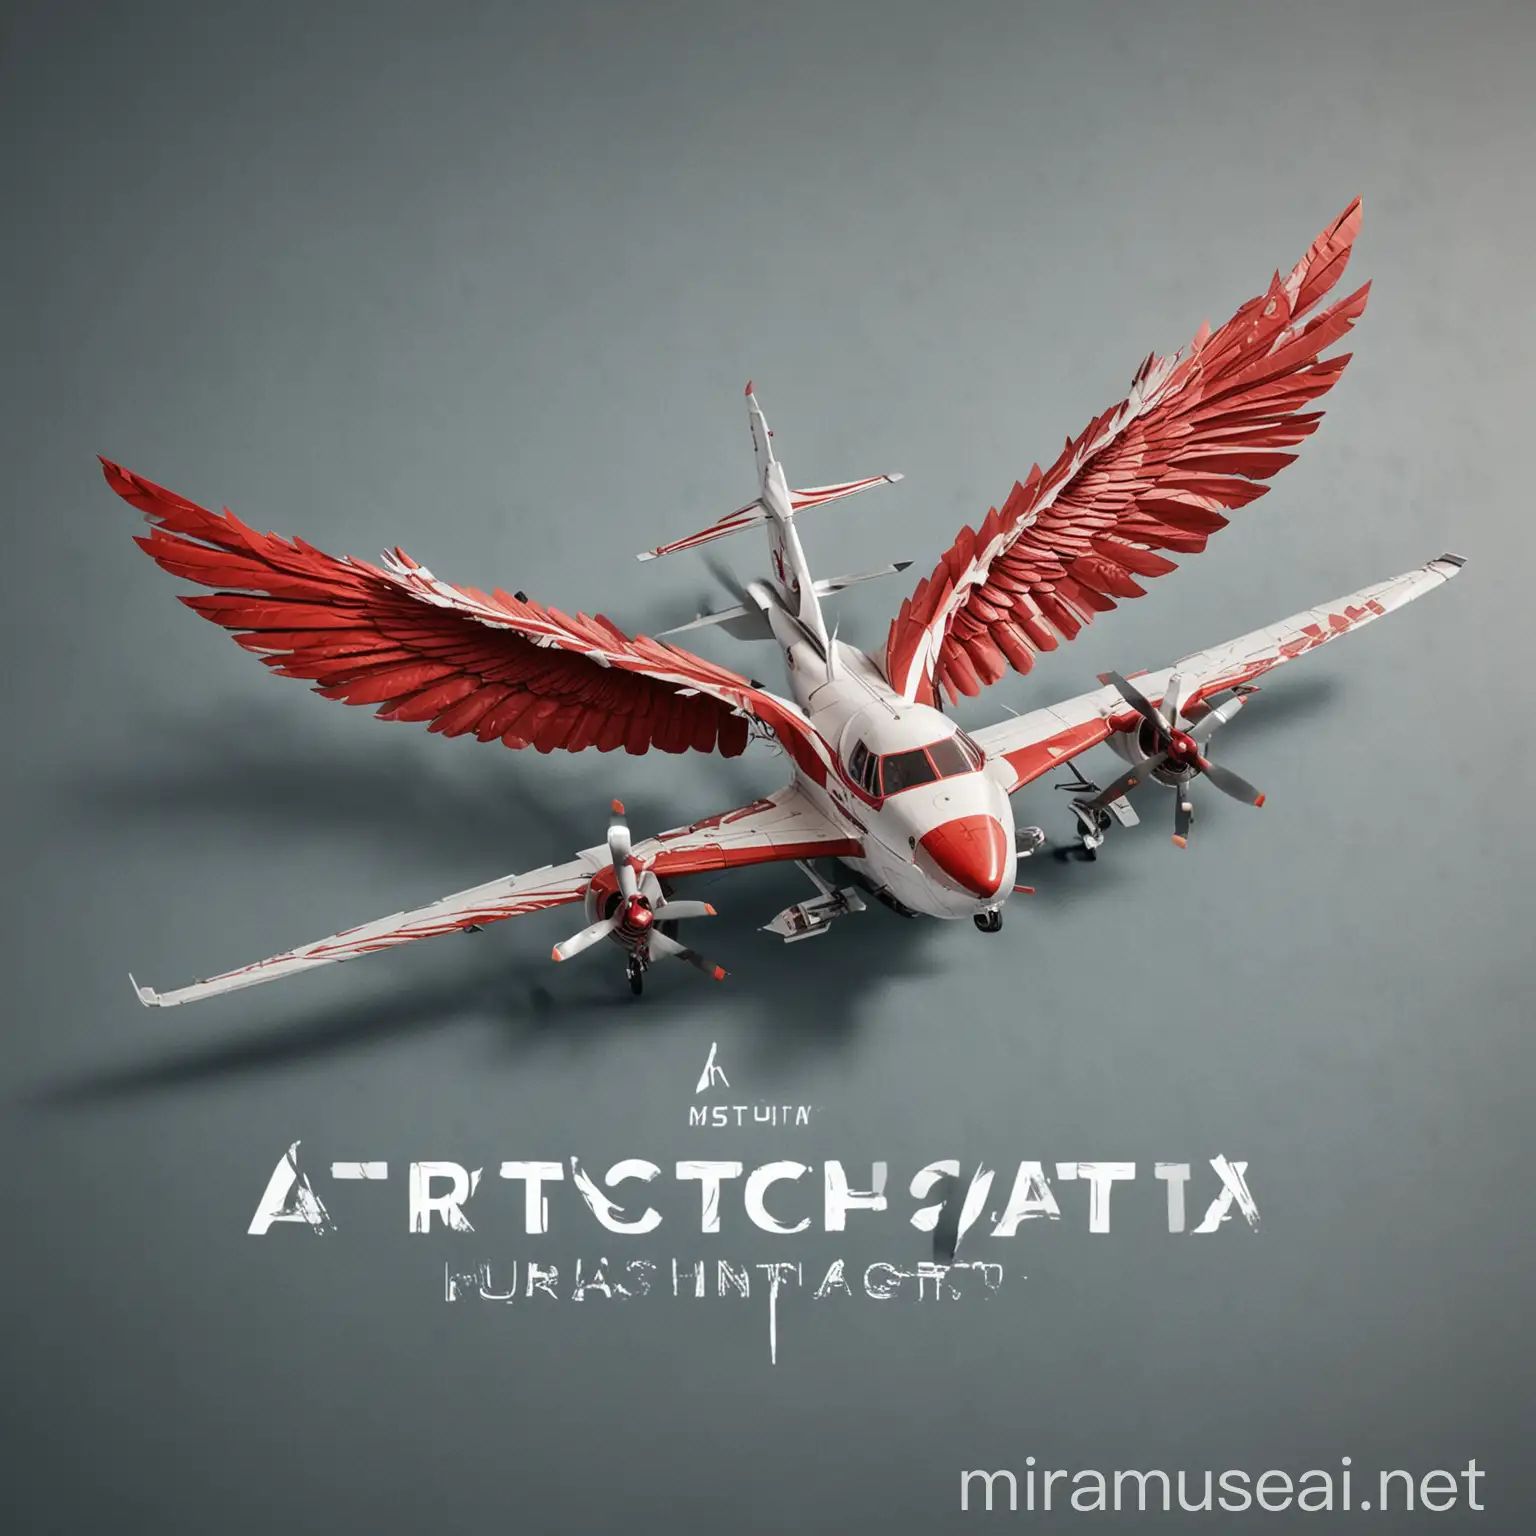 Winged Aircraft Flying with Arutschatta Logo